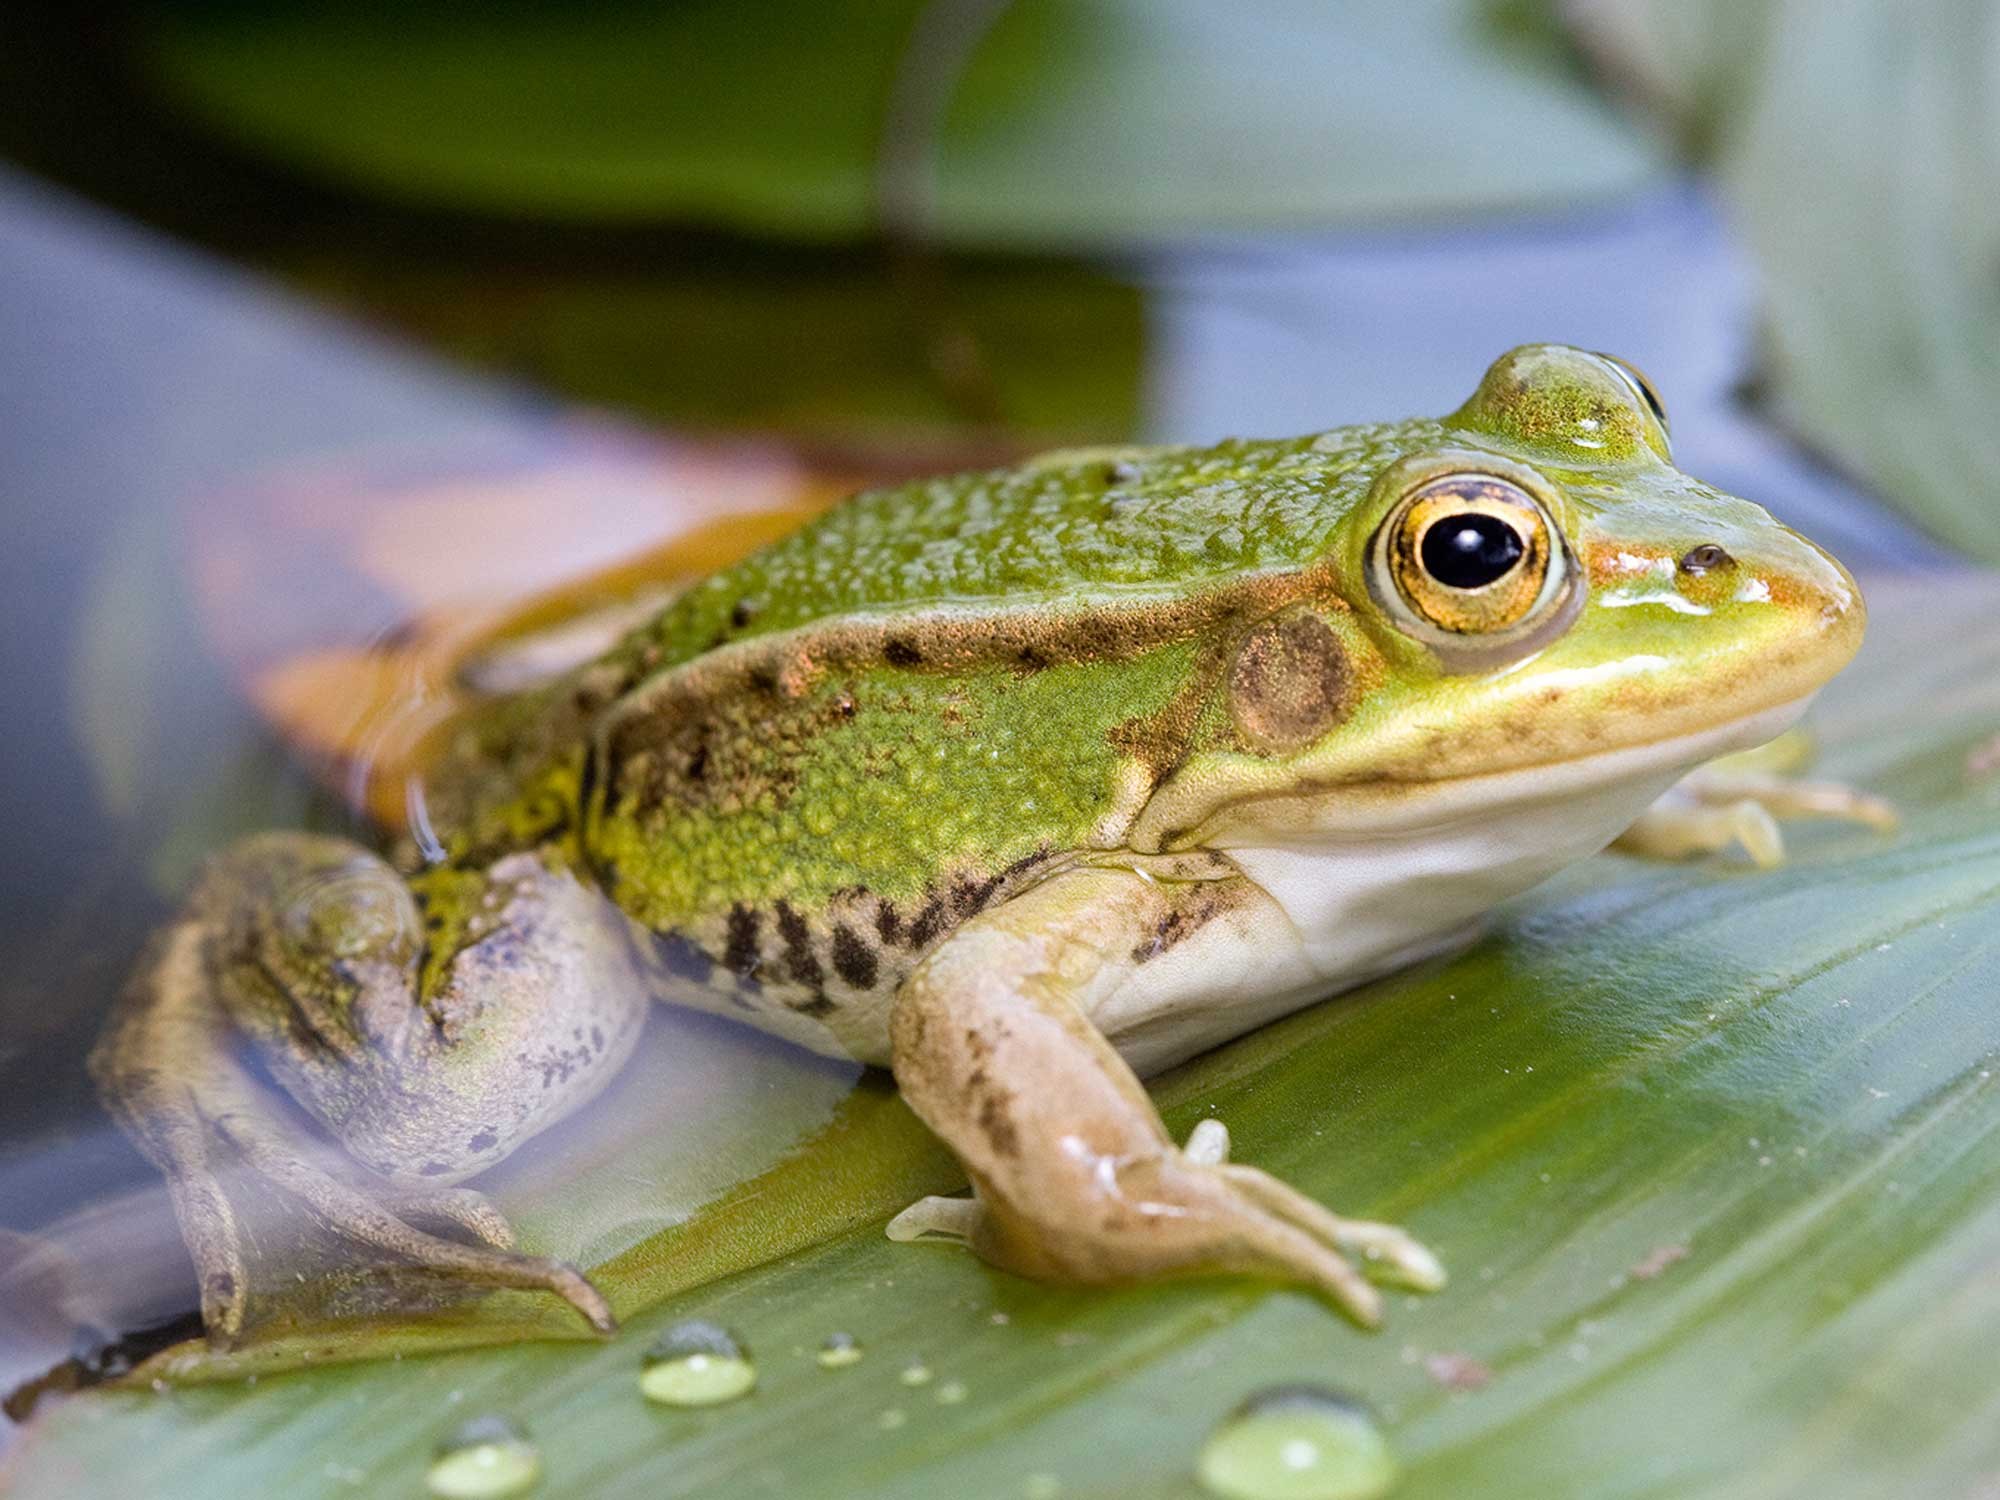 Iamge of the pond frog which has been identified as a native species thanks to its distinctive local accent